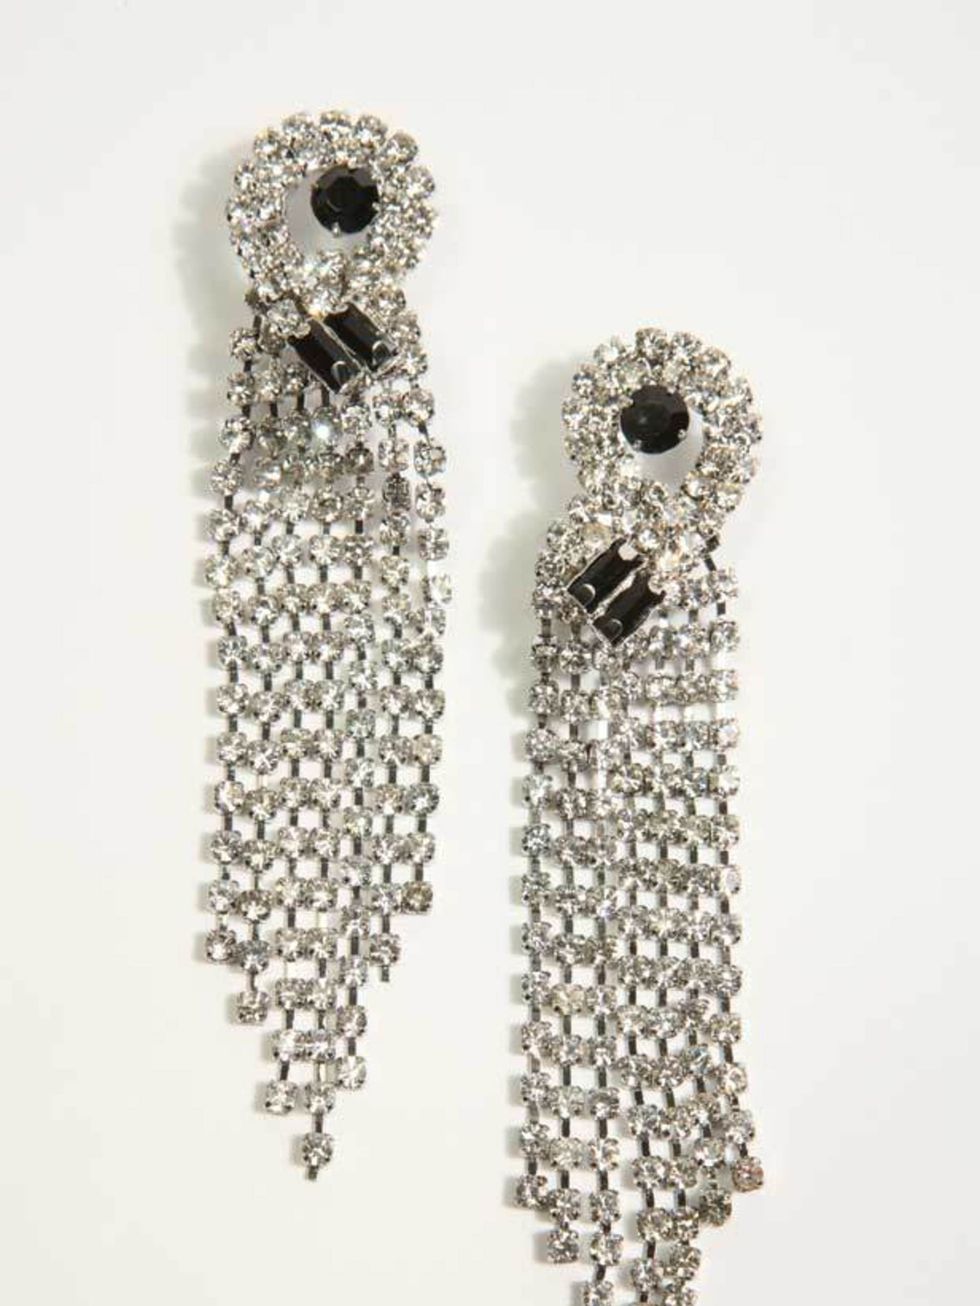 <p>Diamante fringe earrings, £18, by <a href="http://www.urbanoutfitters.co.uk/Statement-Diamante-Fringe/invt/5761401201163&amp;bklist=icat,5,shop,womens,womensaccessories,wearrings">Urban Outfitters</a> </p>